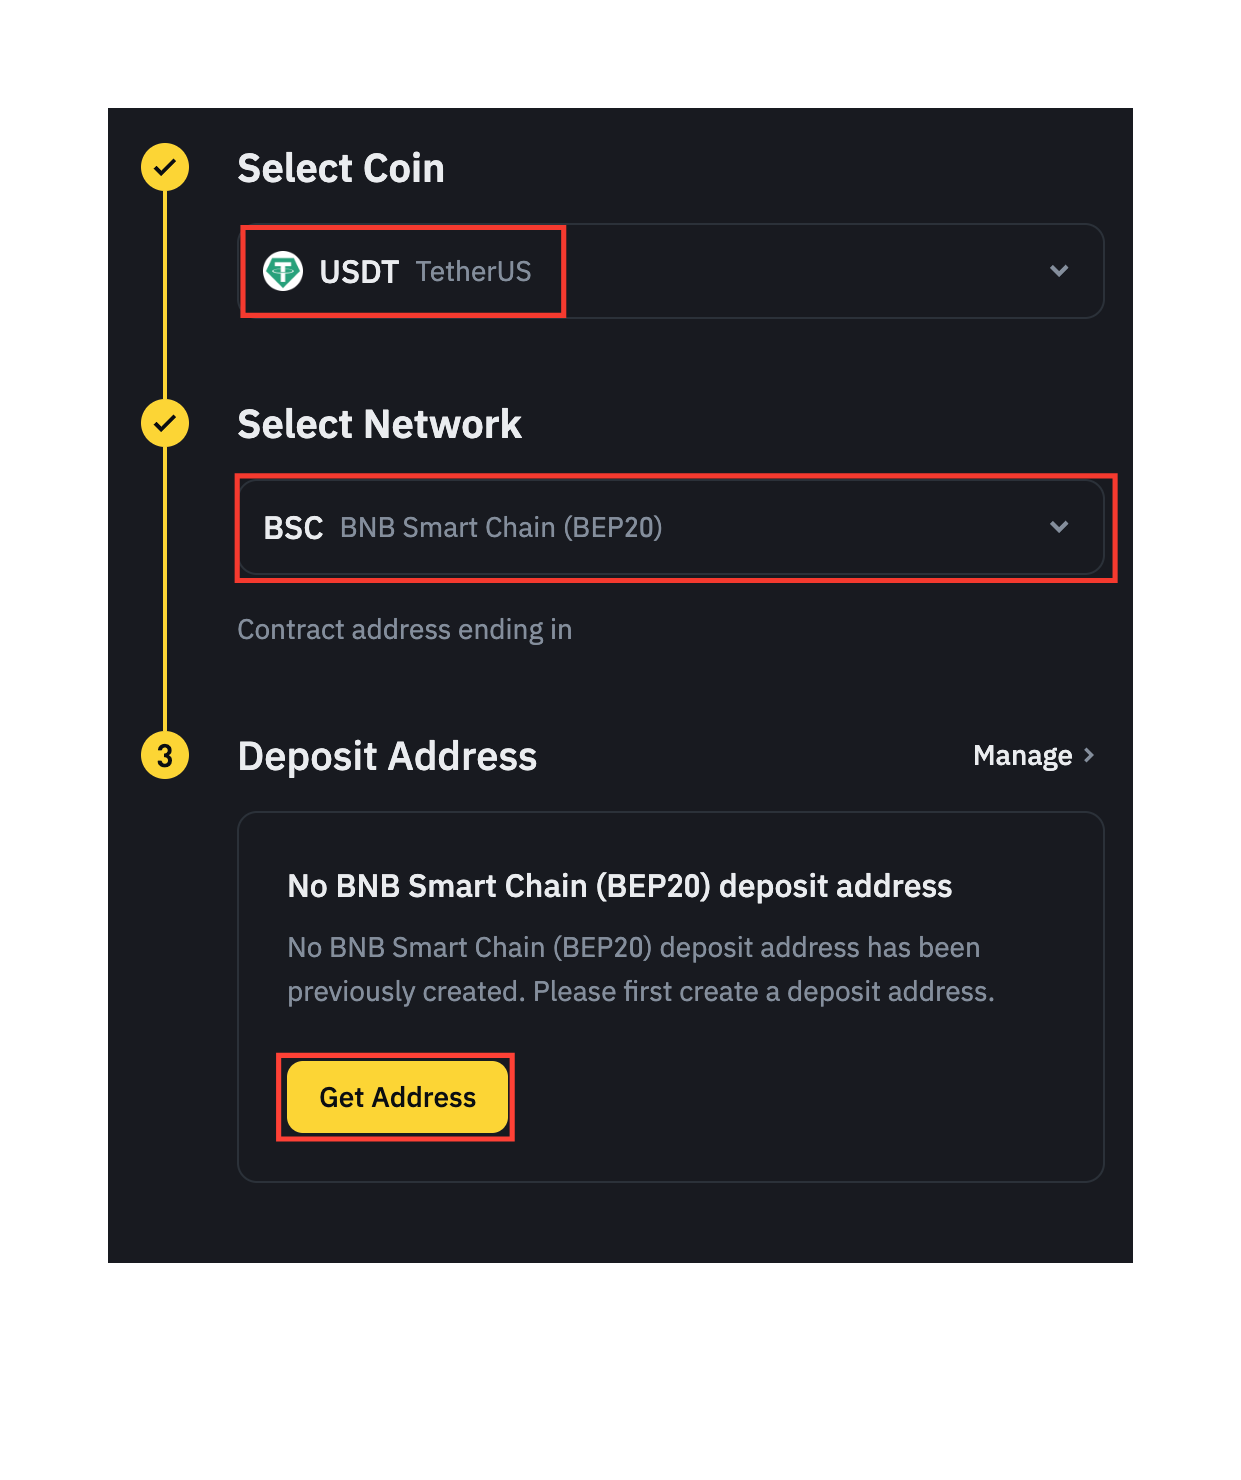 Guide to Getting Your USDT-BSC Address